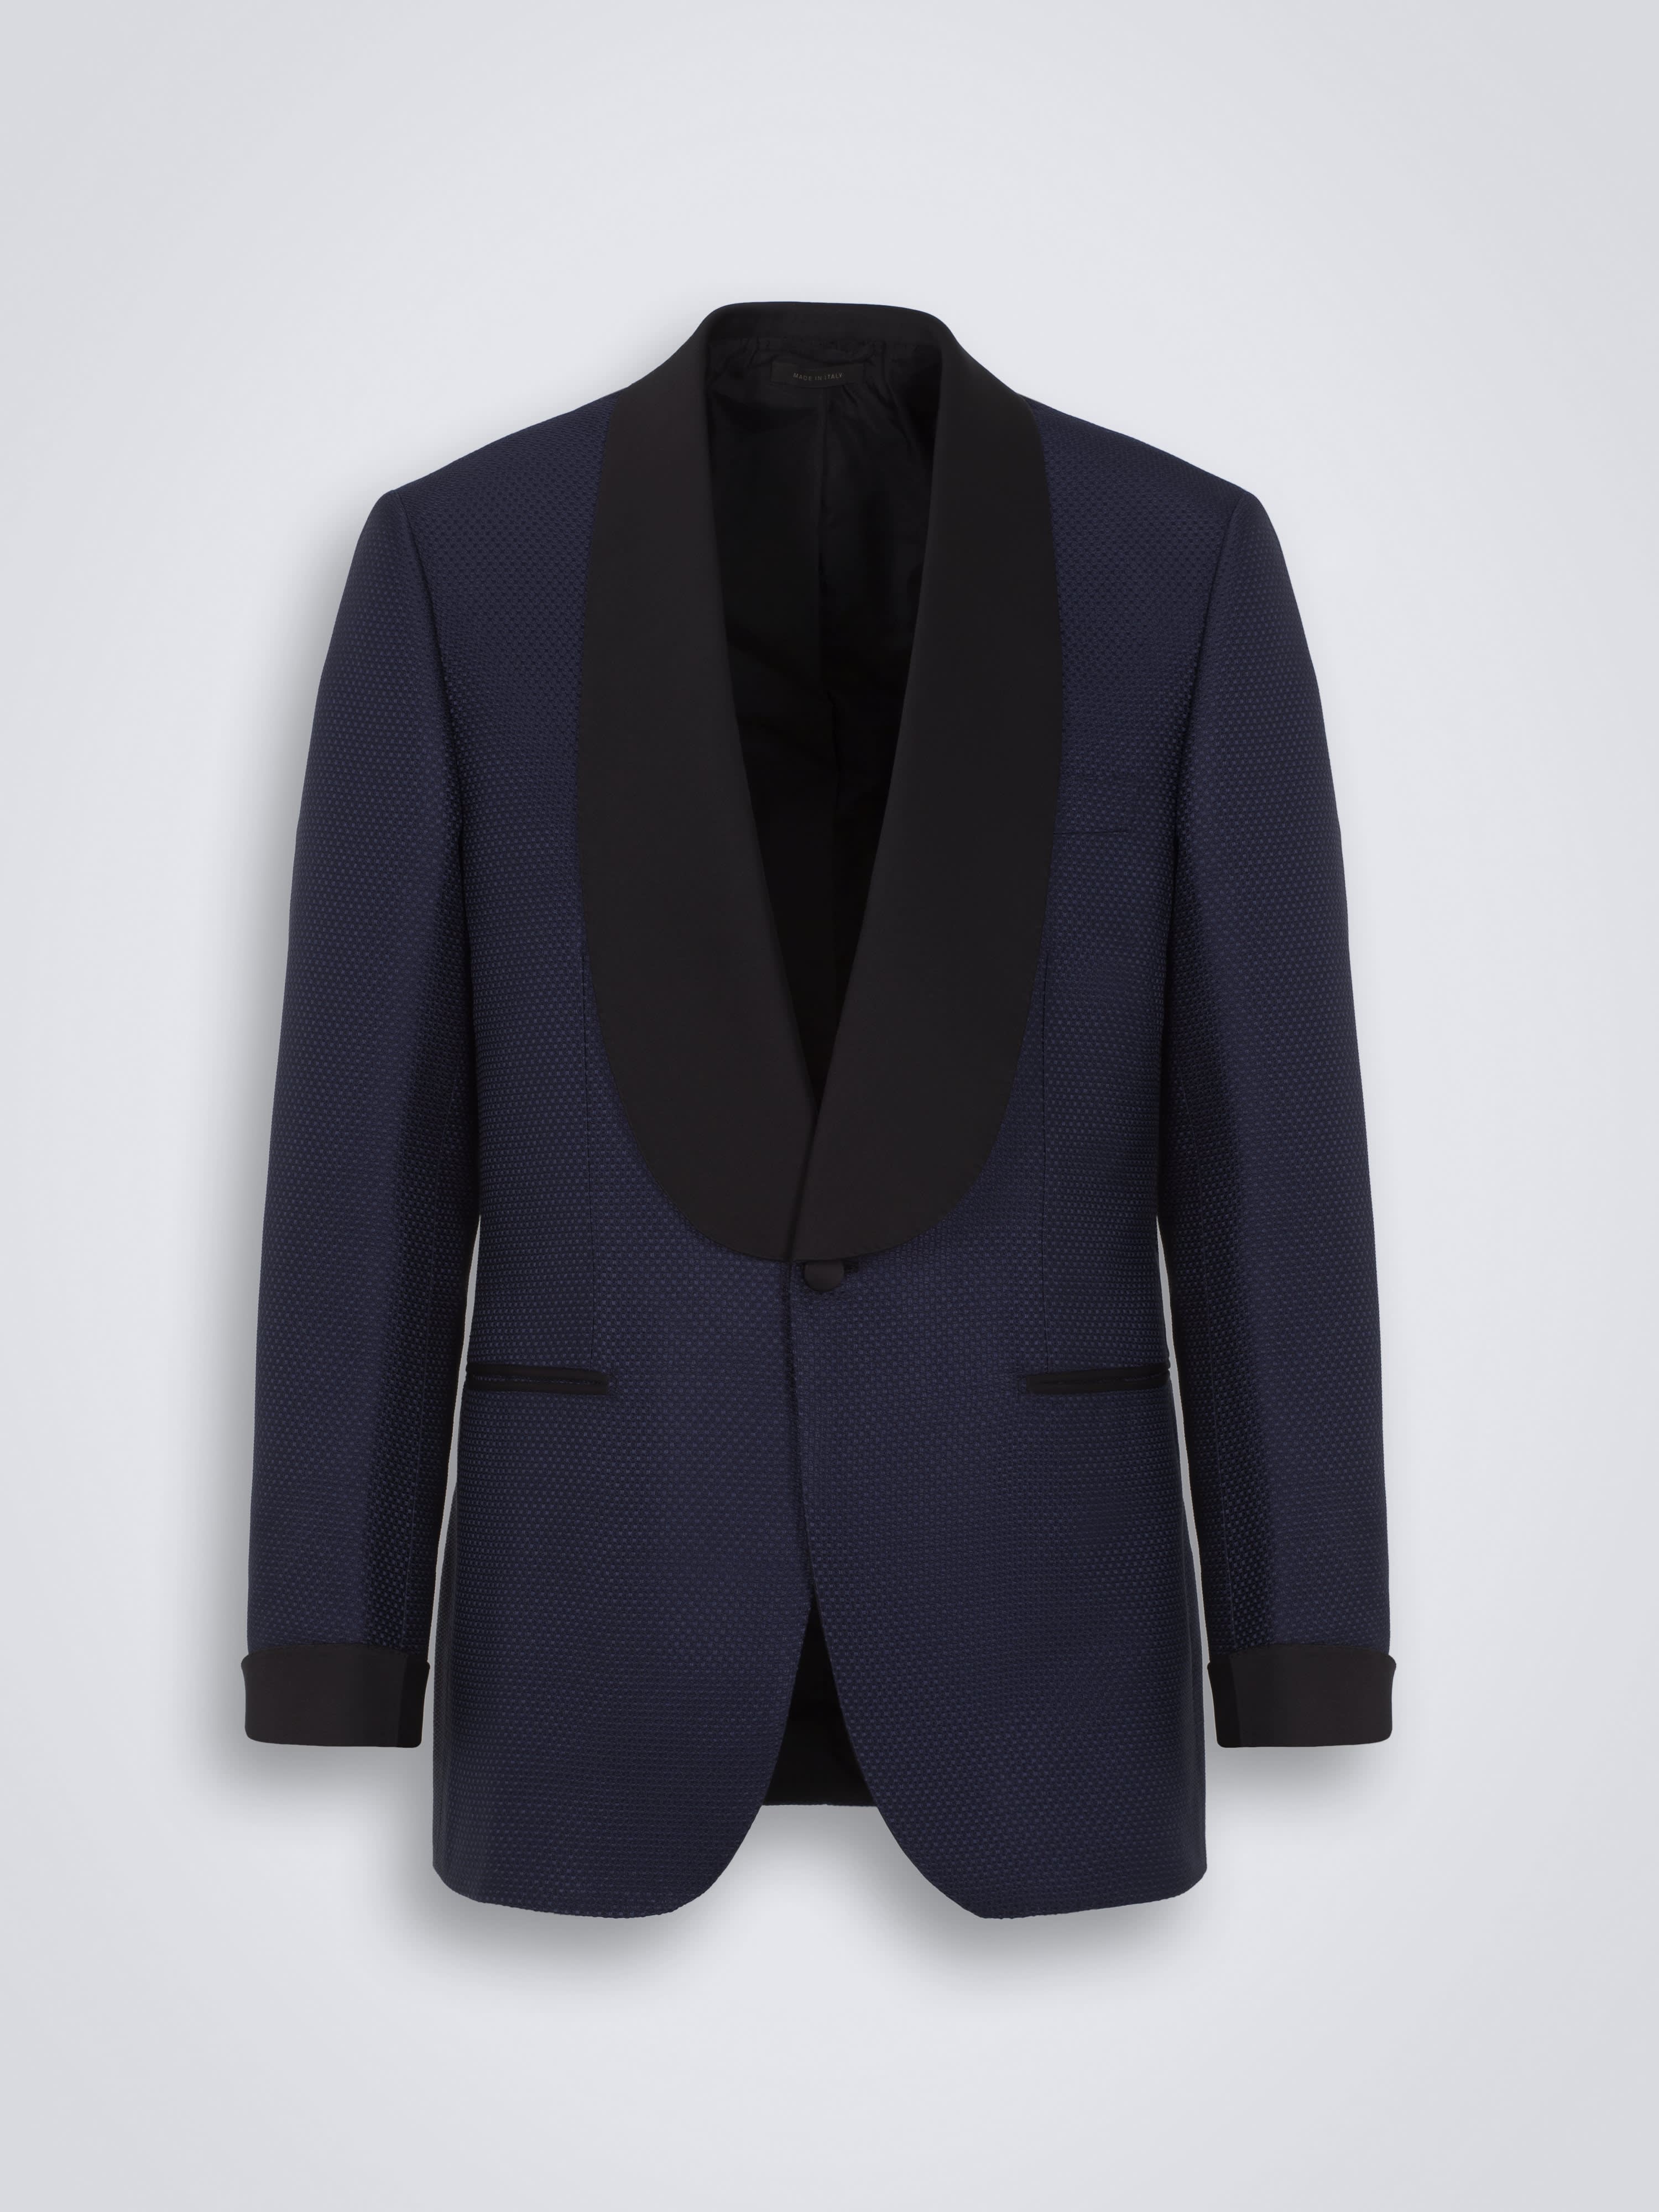 Tuxedos | Brioni® GB Official Store